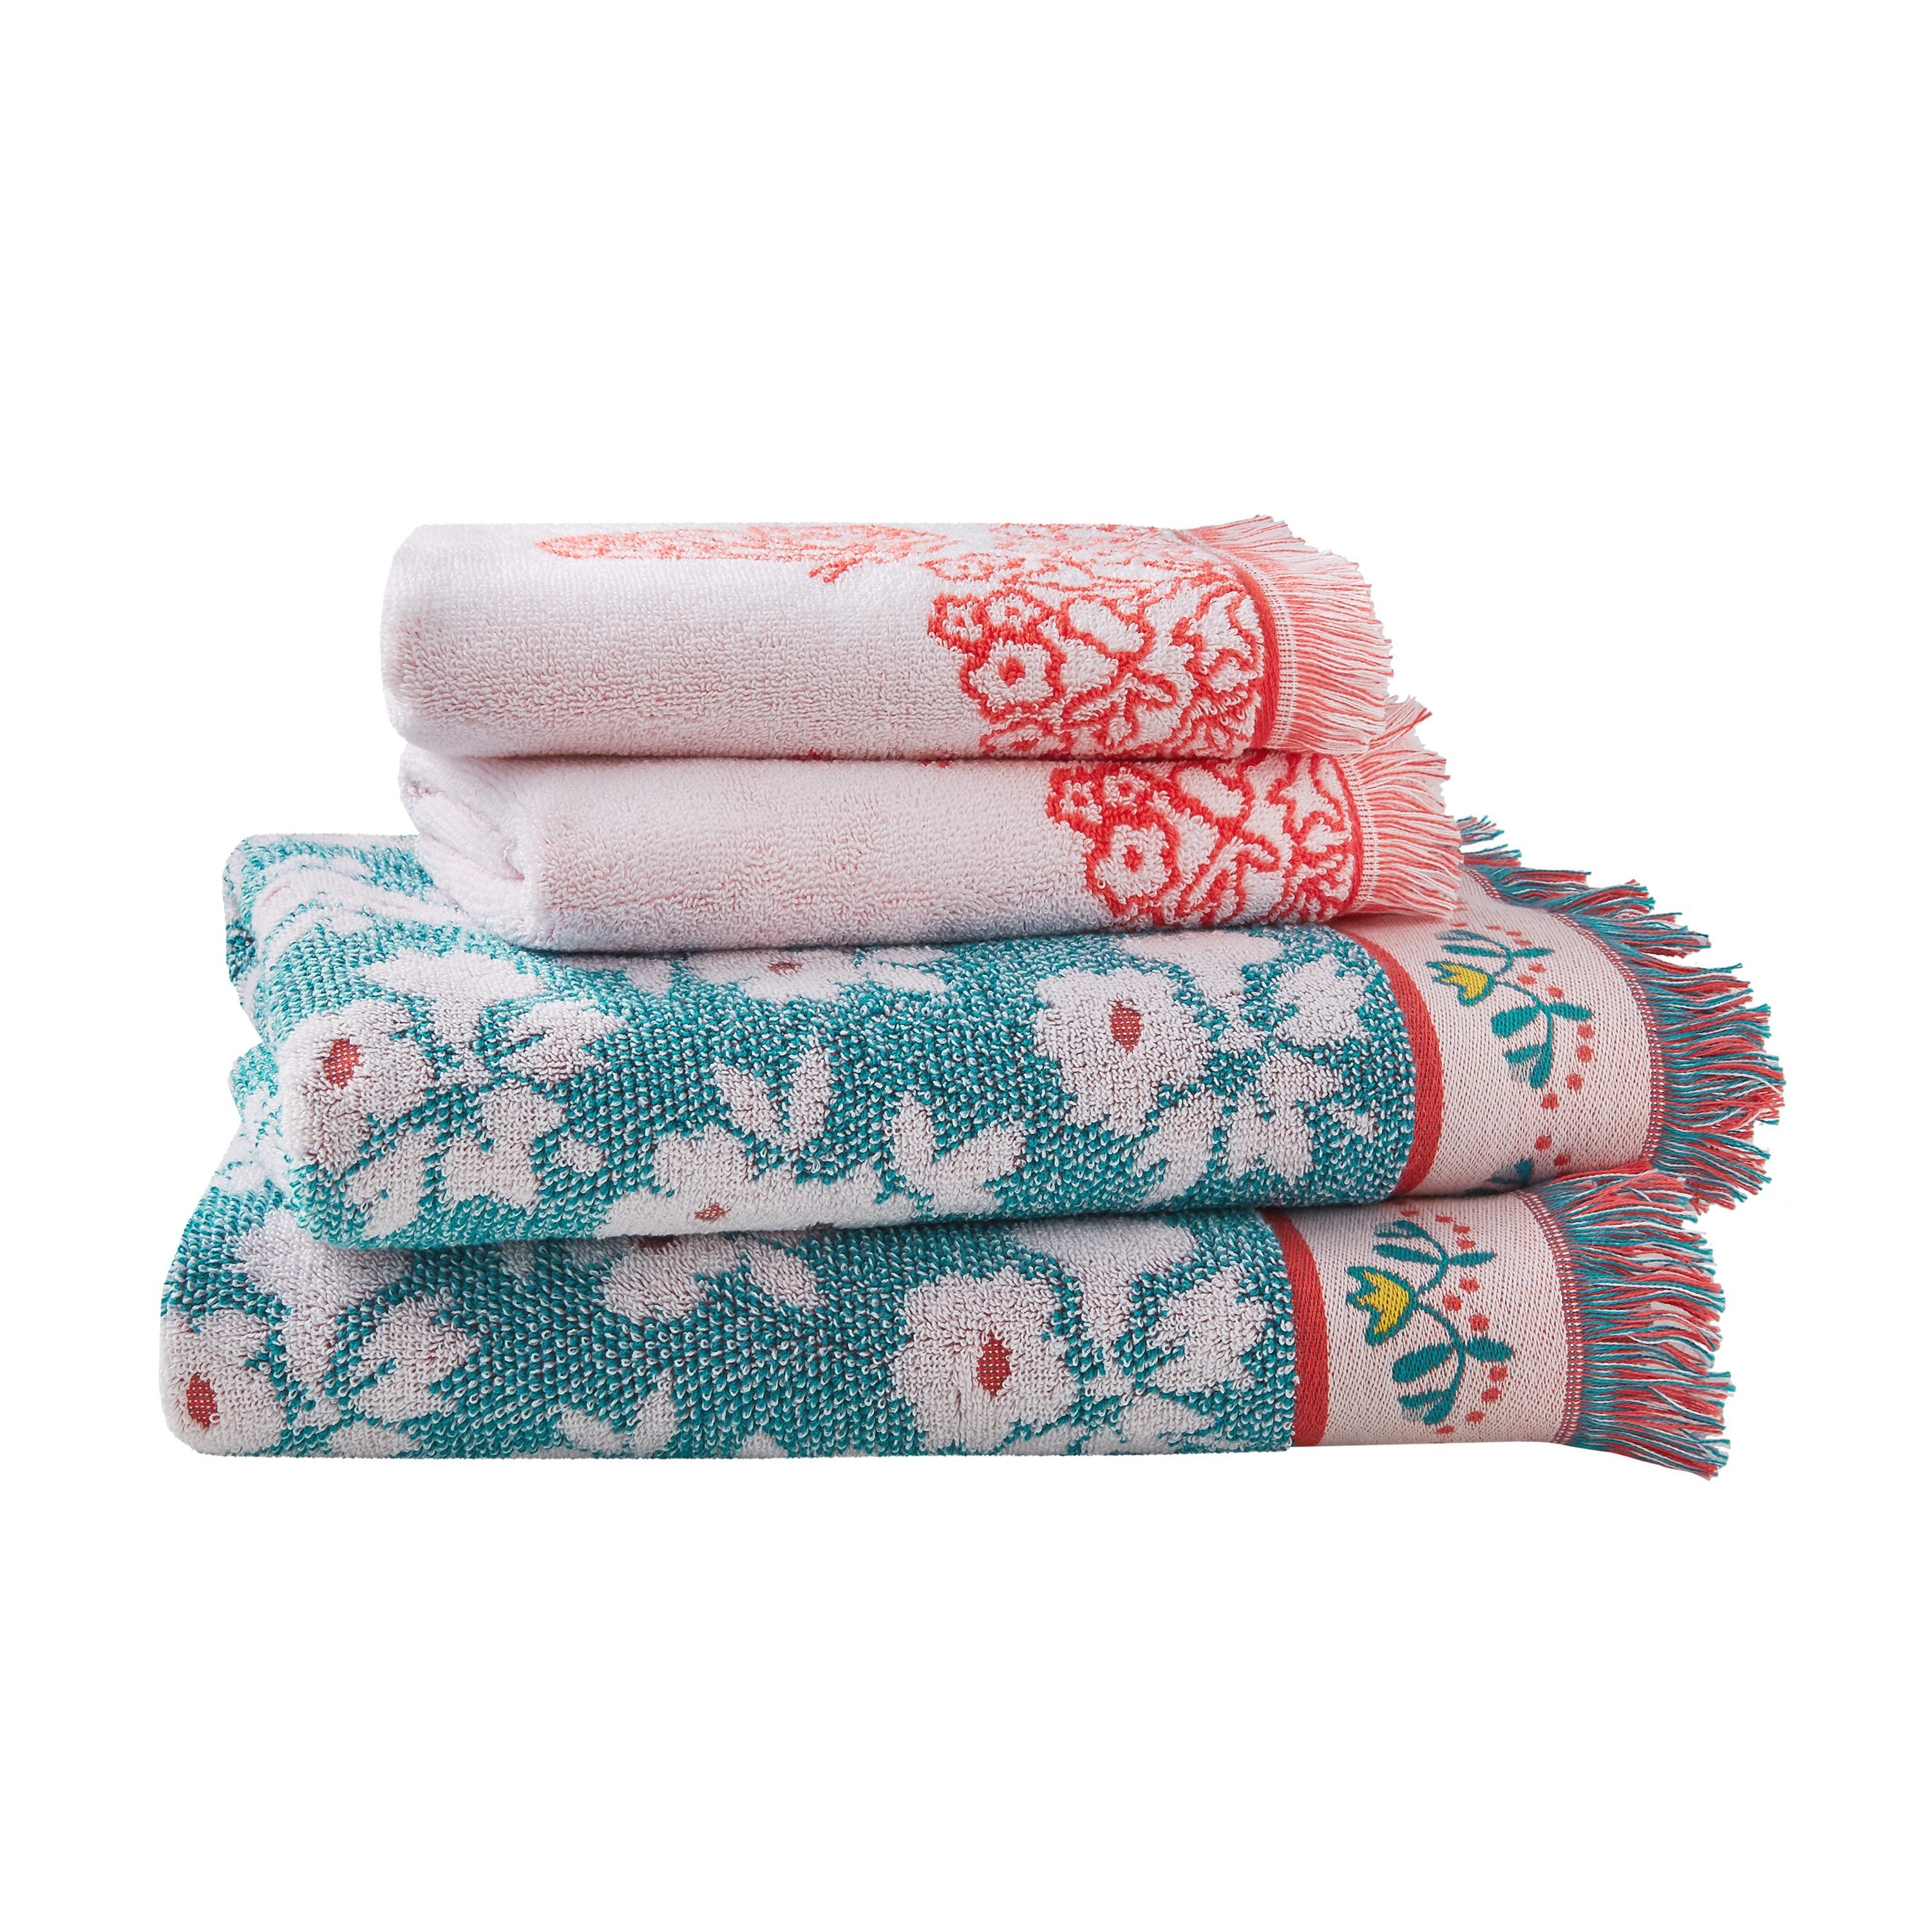 The Pioneer Woman 4 Piece Cotton Bath Towel Set, Teal Thunder Green - image 1 of 5